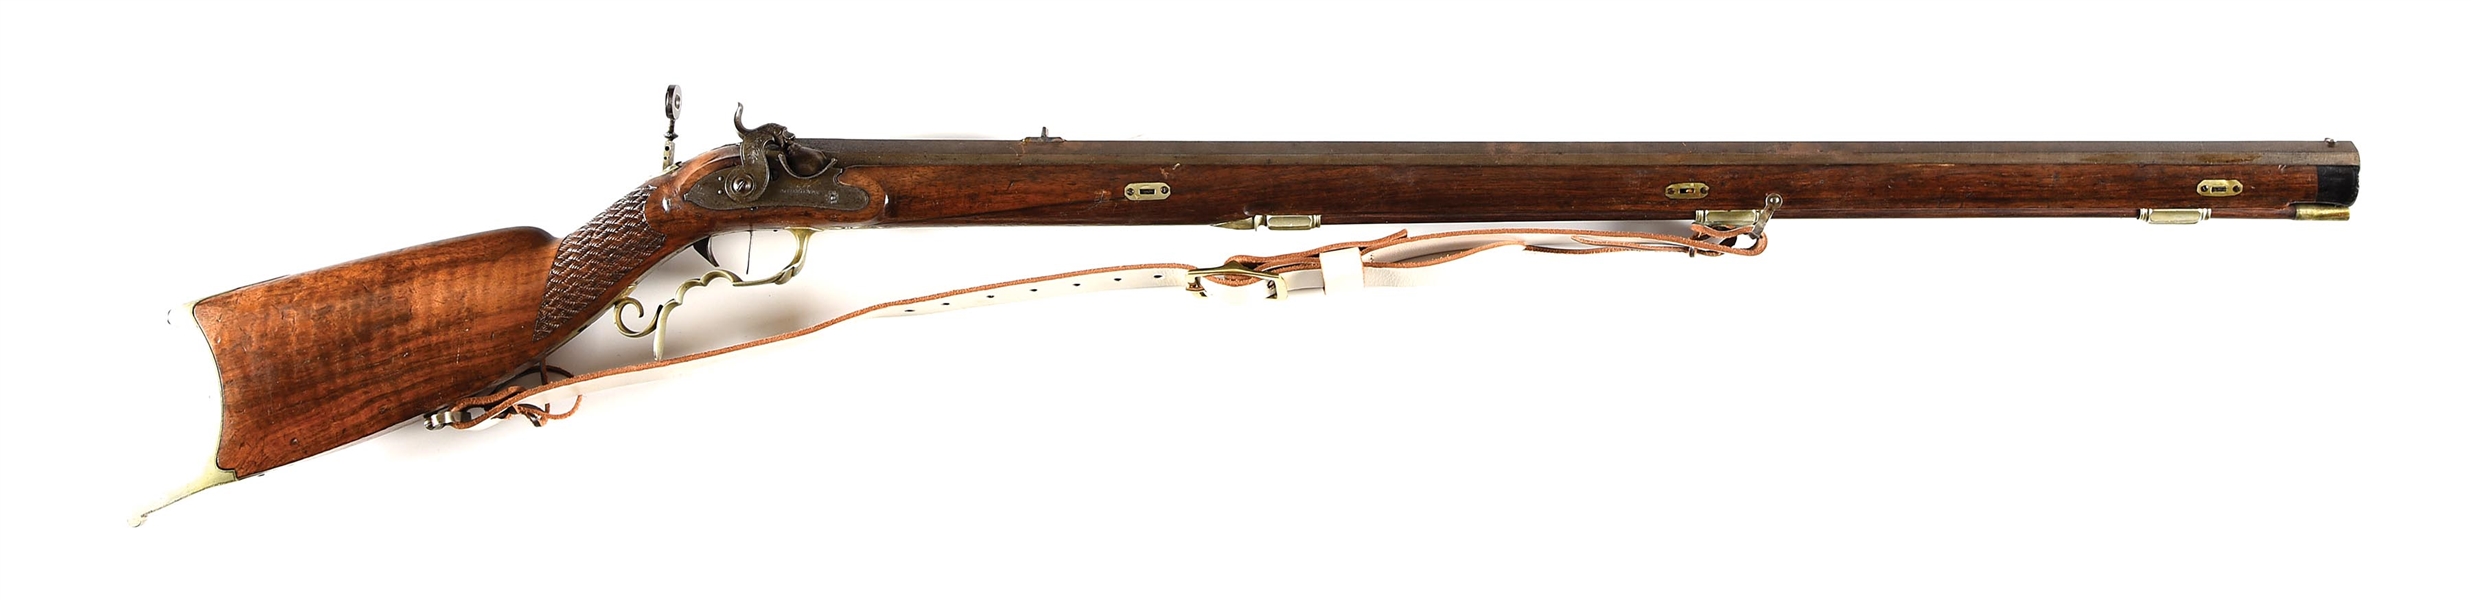 (A) SWISS PERCUSSION TARGET RIFLE MARKED FOR PRODUCTION IN CHERCENAY.